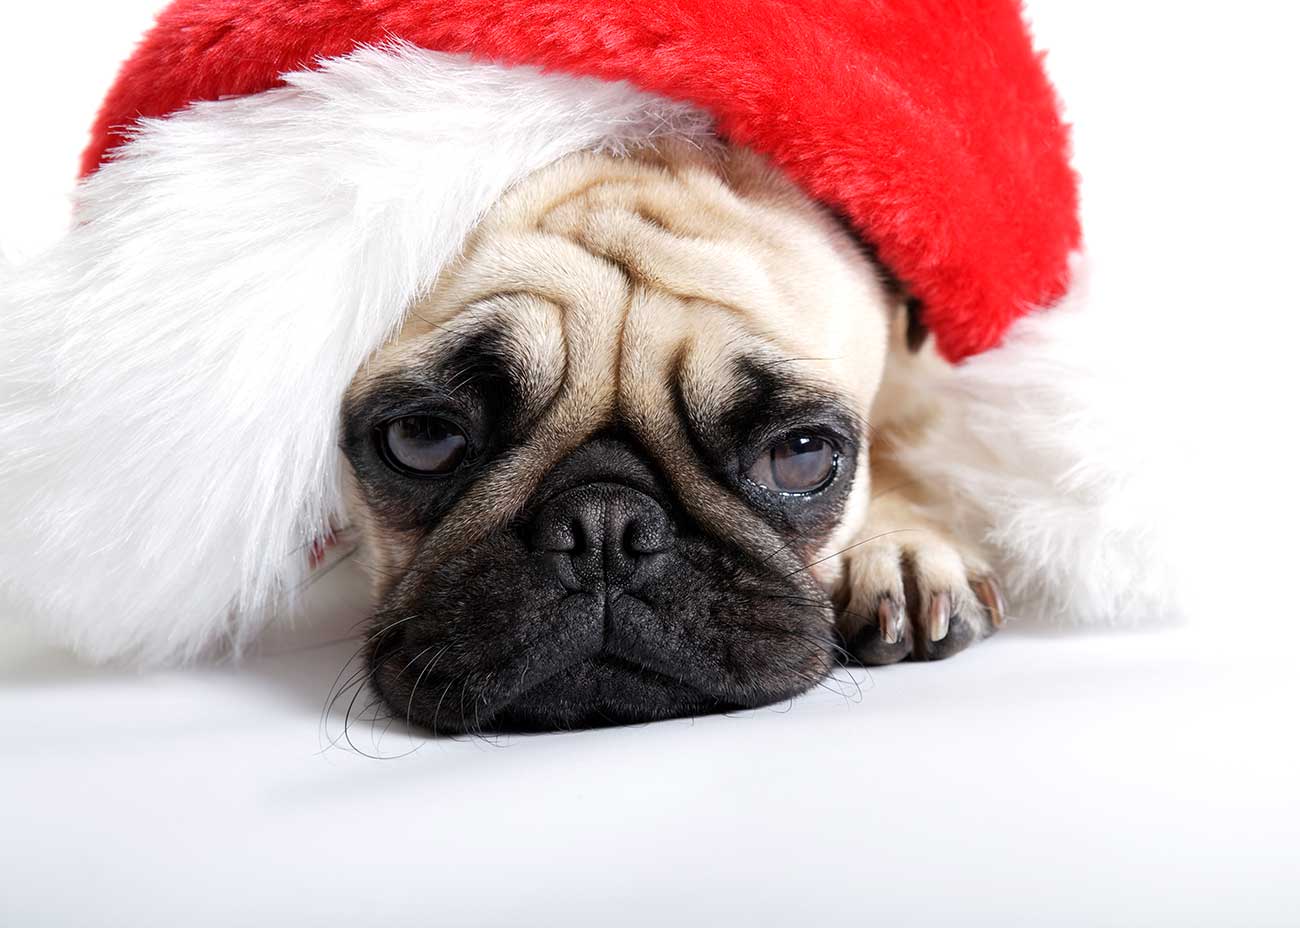 Overcoming the holiday blues